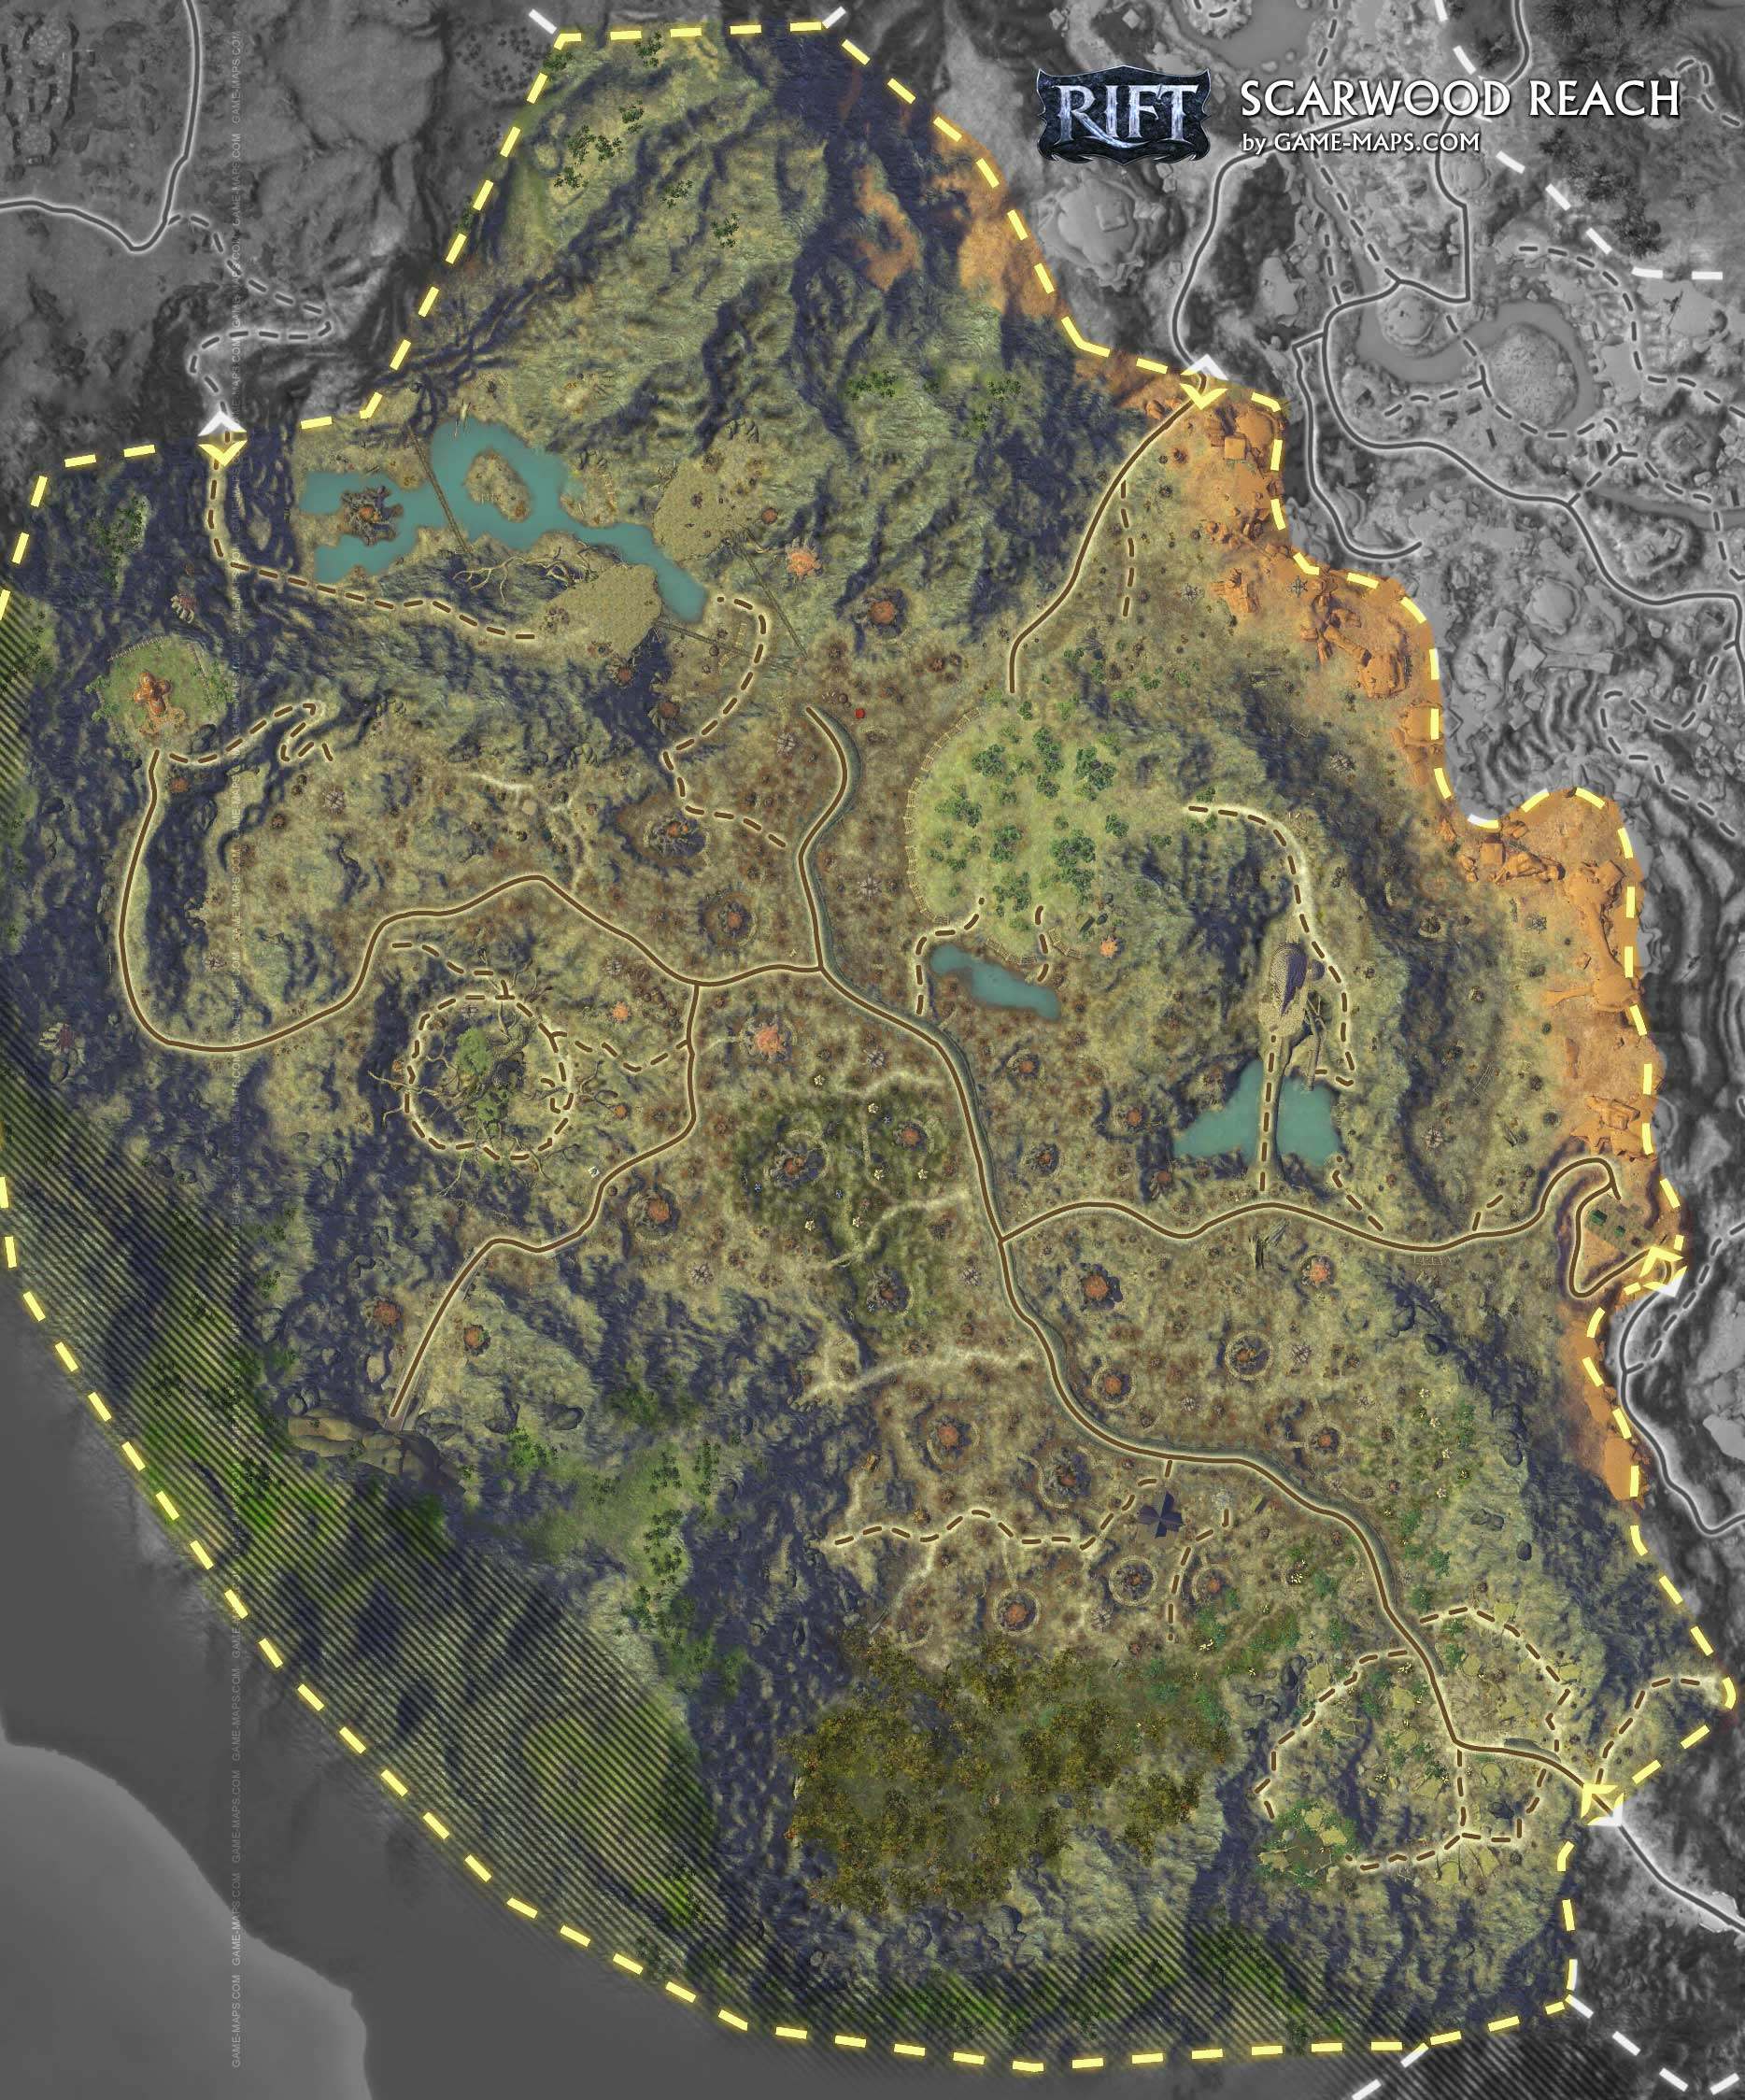 Map of Scarwood Reach Zone in Rift